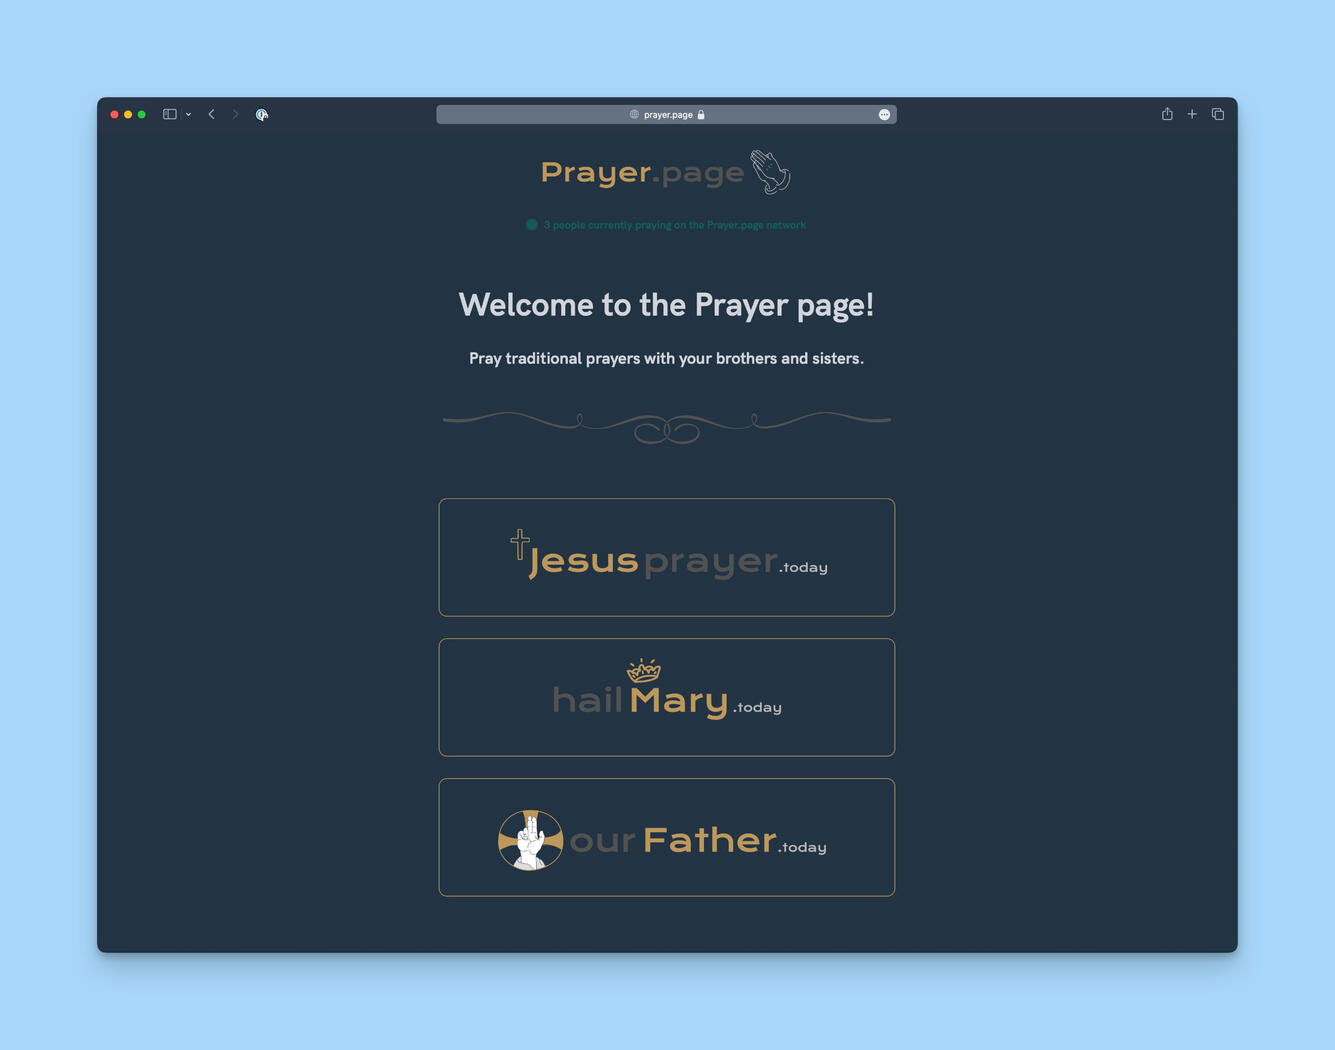 The Prayer Page homepage